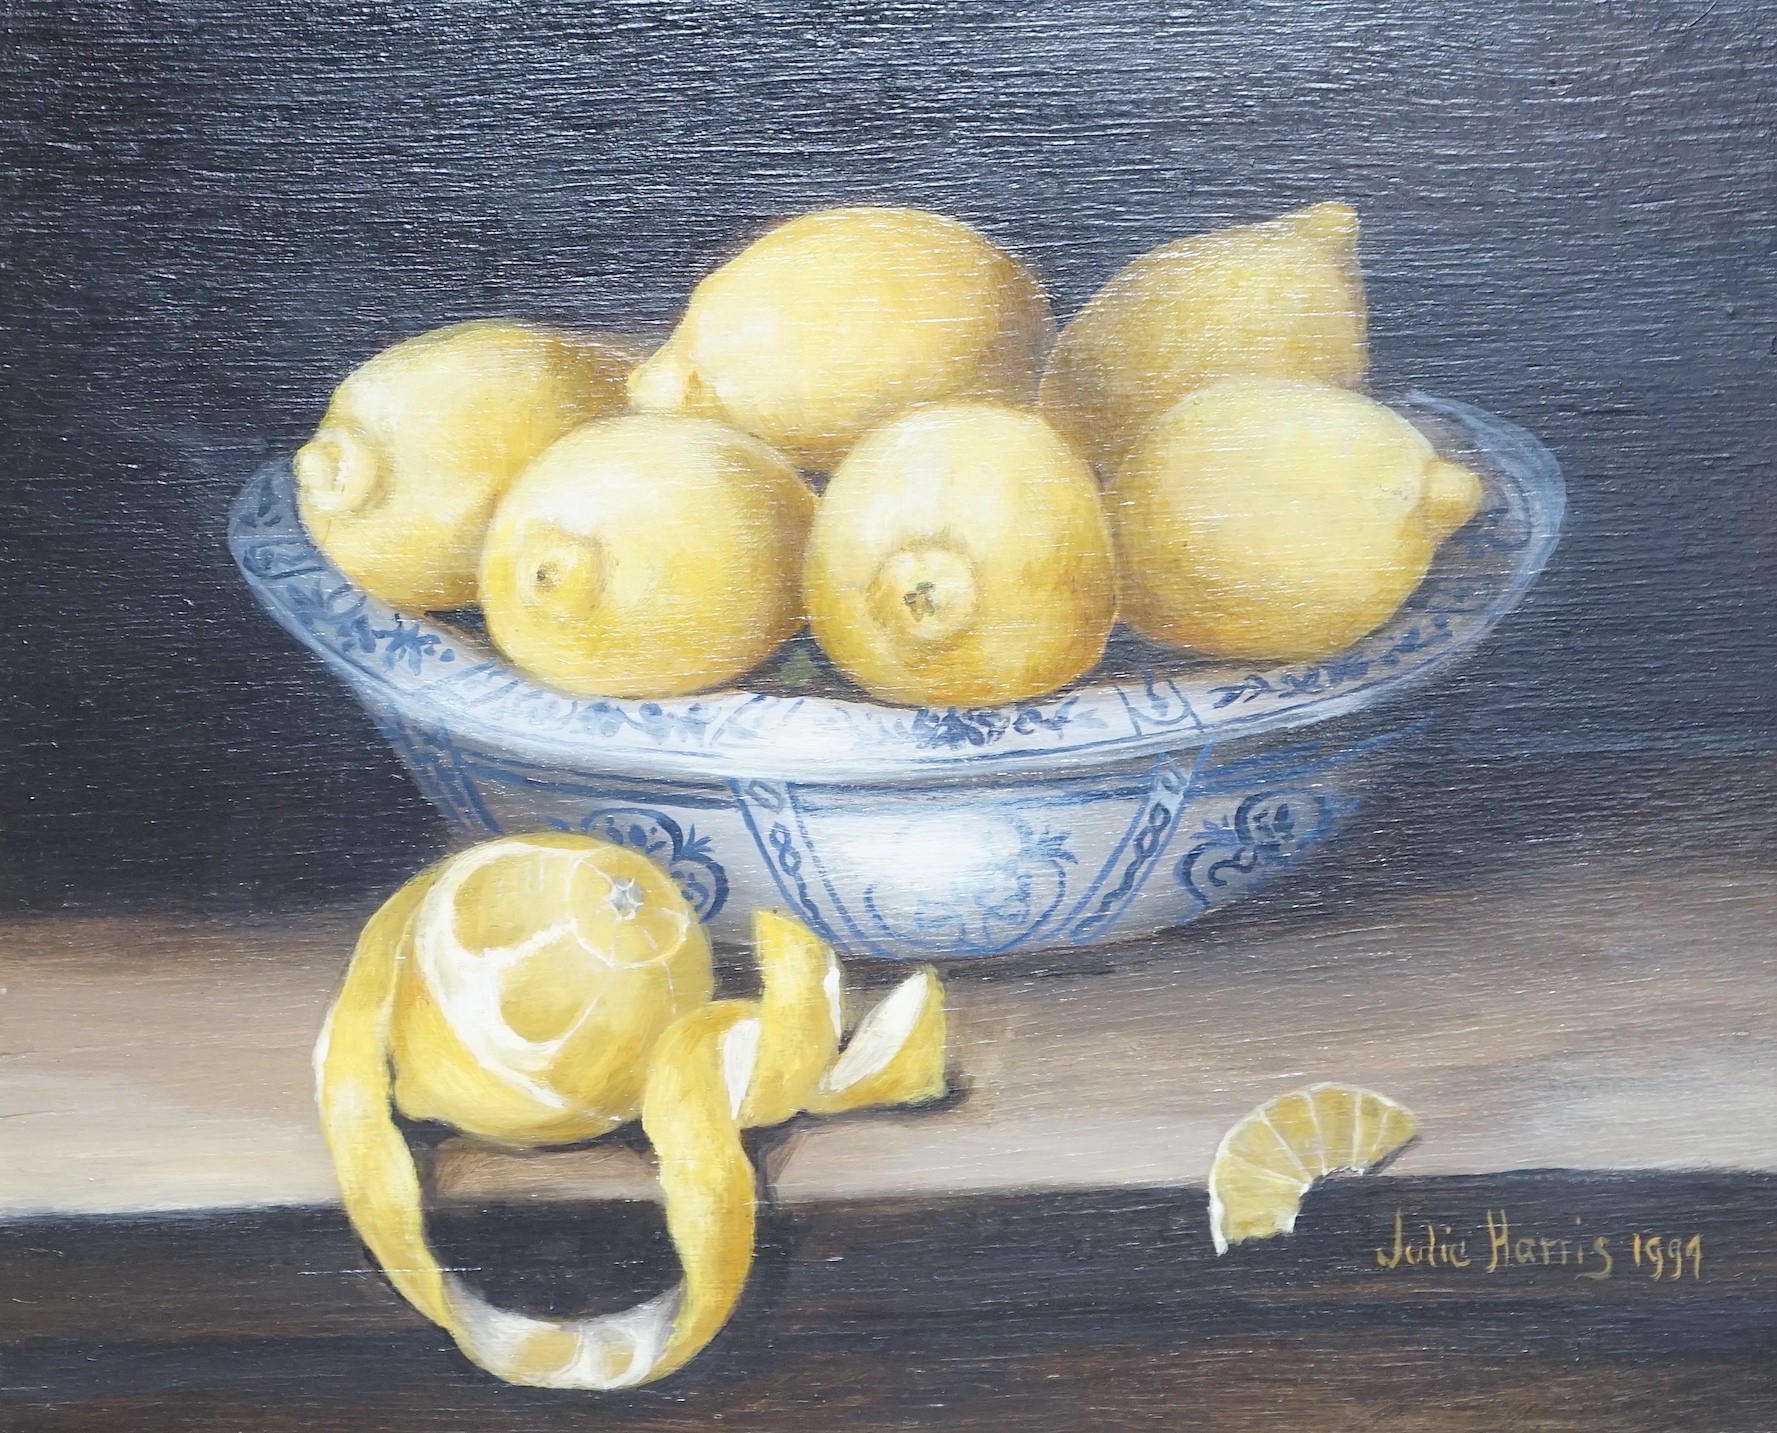 Julie Harris (b.1953), oil on panel, Still life of lemons in a delft bowl, signed and dated 1994, 24 x 30cm